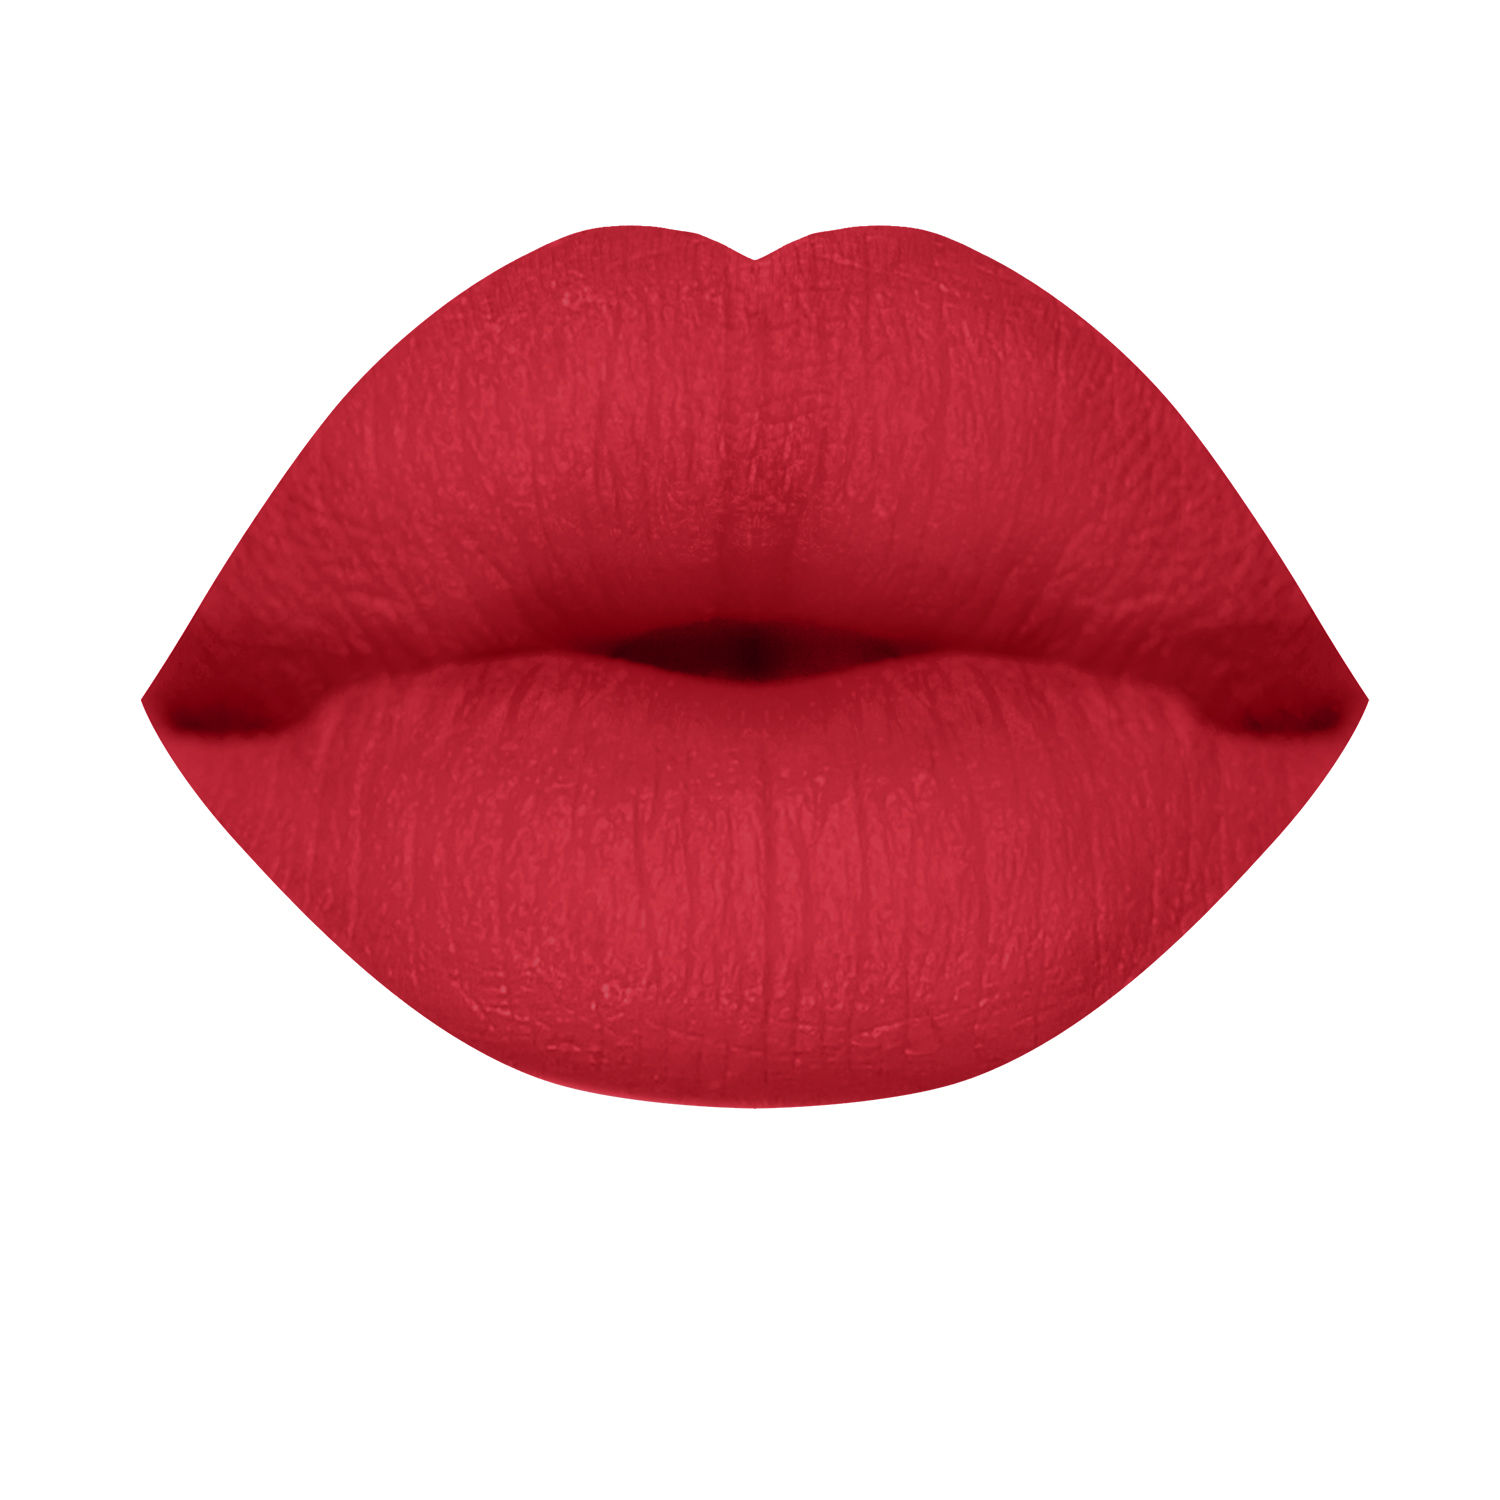 Buy NY Bae Super Matte Lipstick - Fabulous Fienman 9 (4.2 g) | Red | Loaded With Vitamin E | Rich Colour | Long lasting | Smudgeproof | Vegan - Purplle